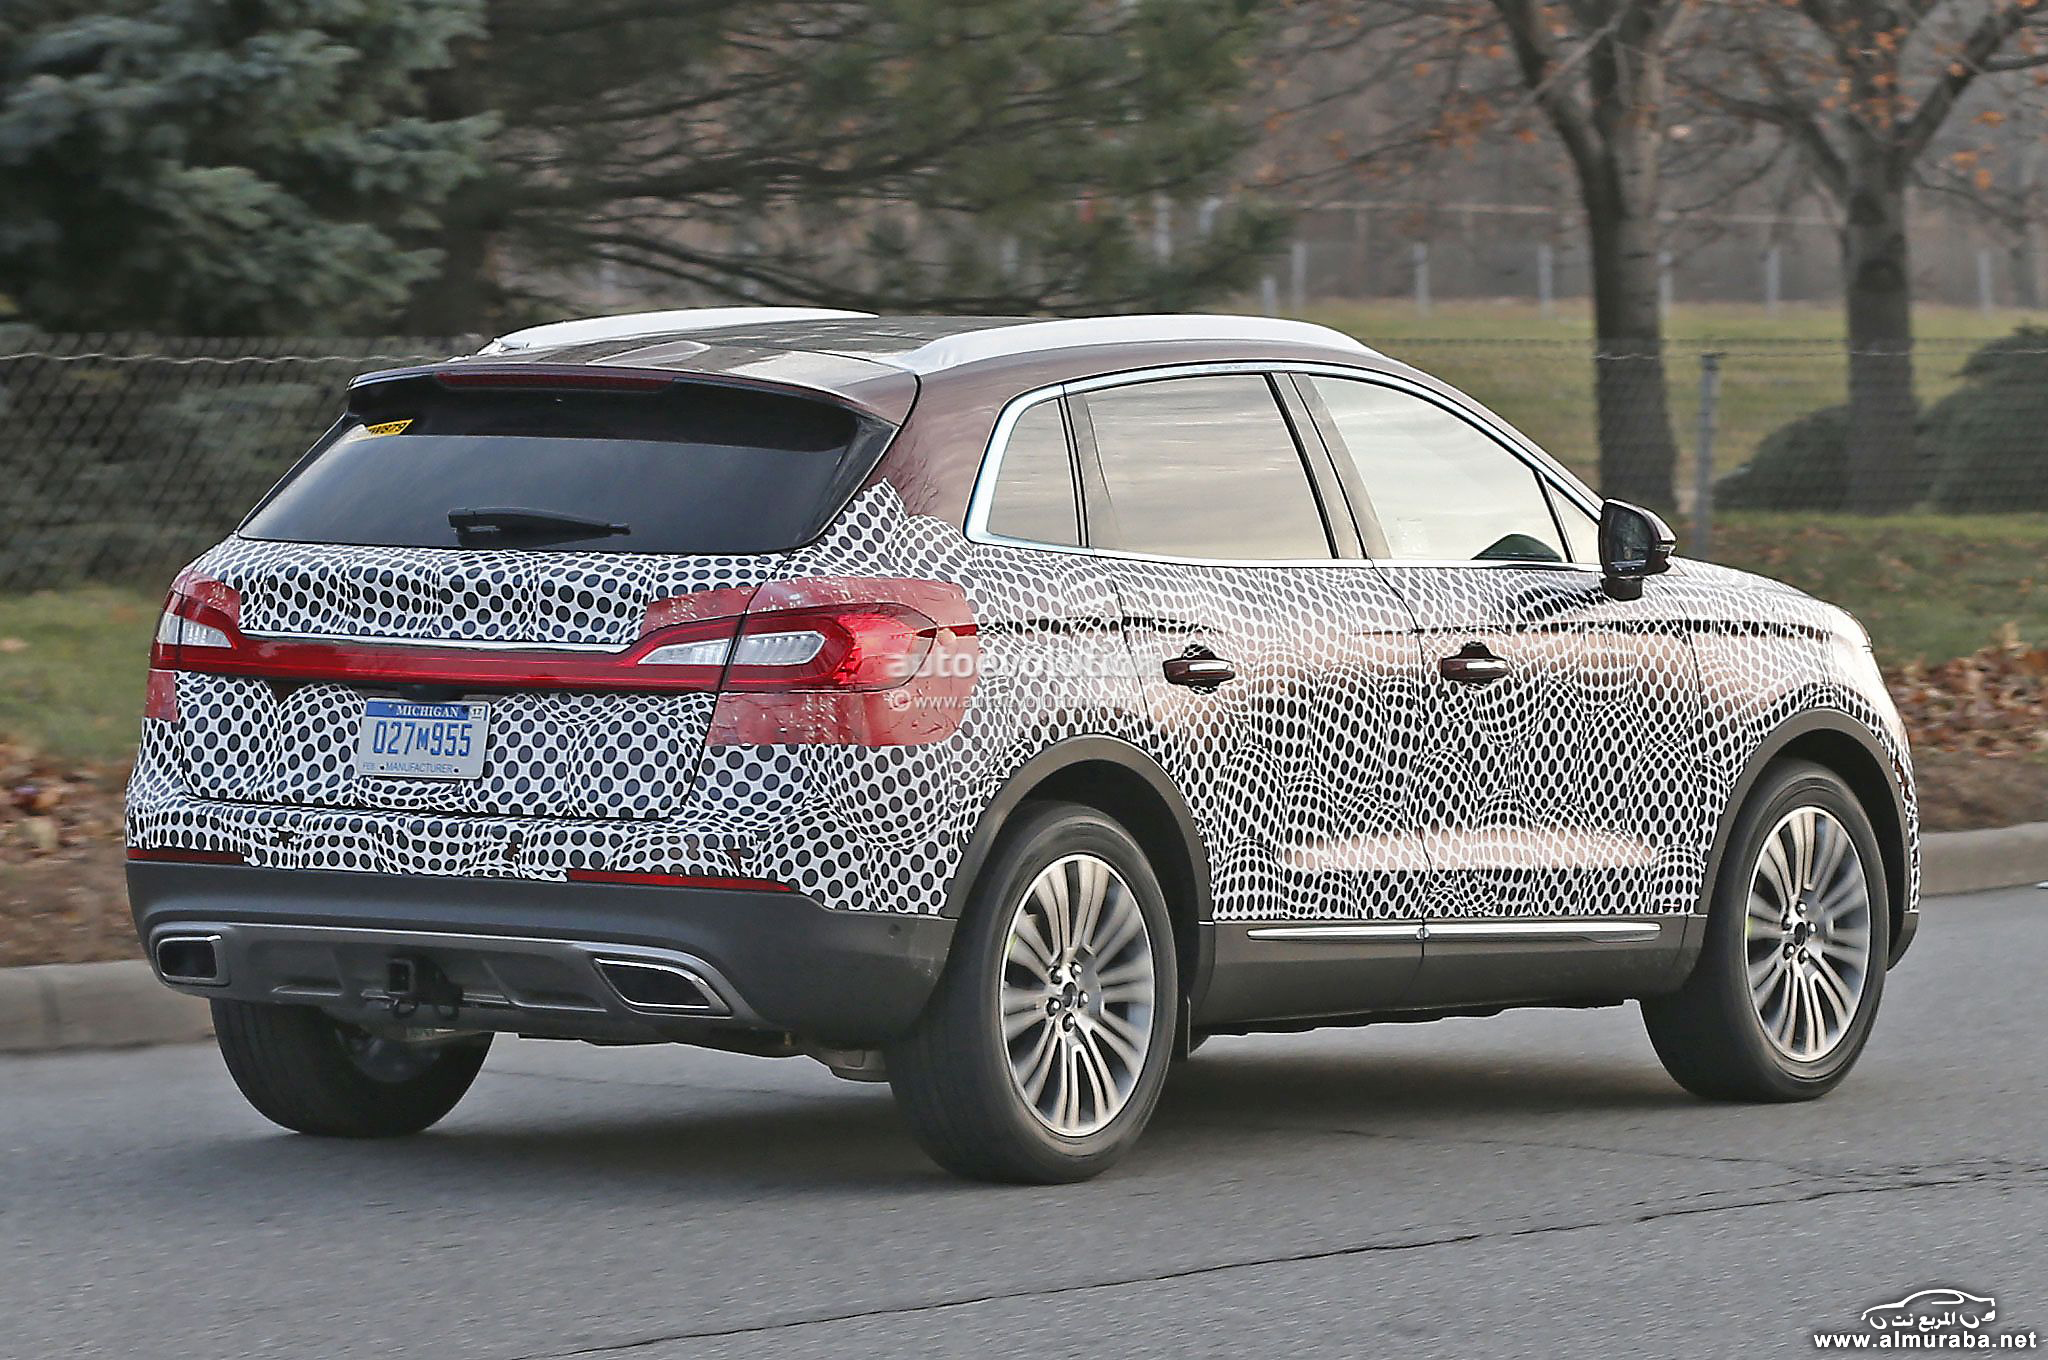 2016-lincoln-mkx-spied-in-production-ready-guise-photo-gallery_9